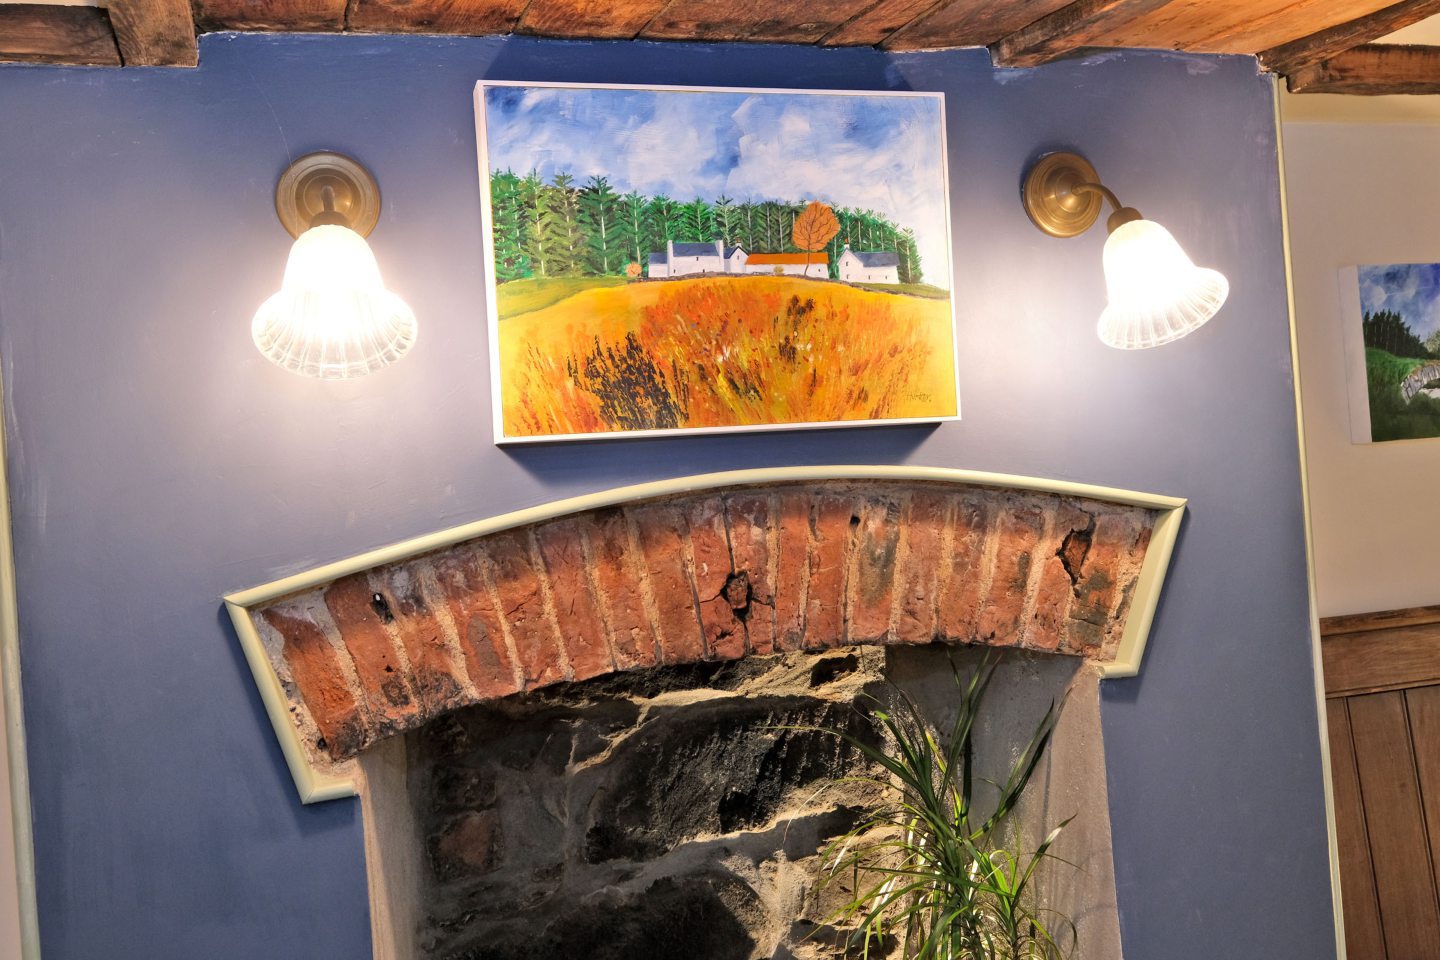 Andrew's beautiful painting hung above the rustic fireplace.